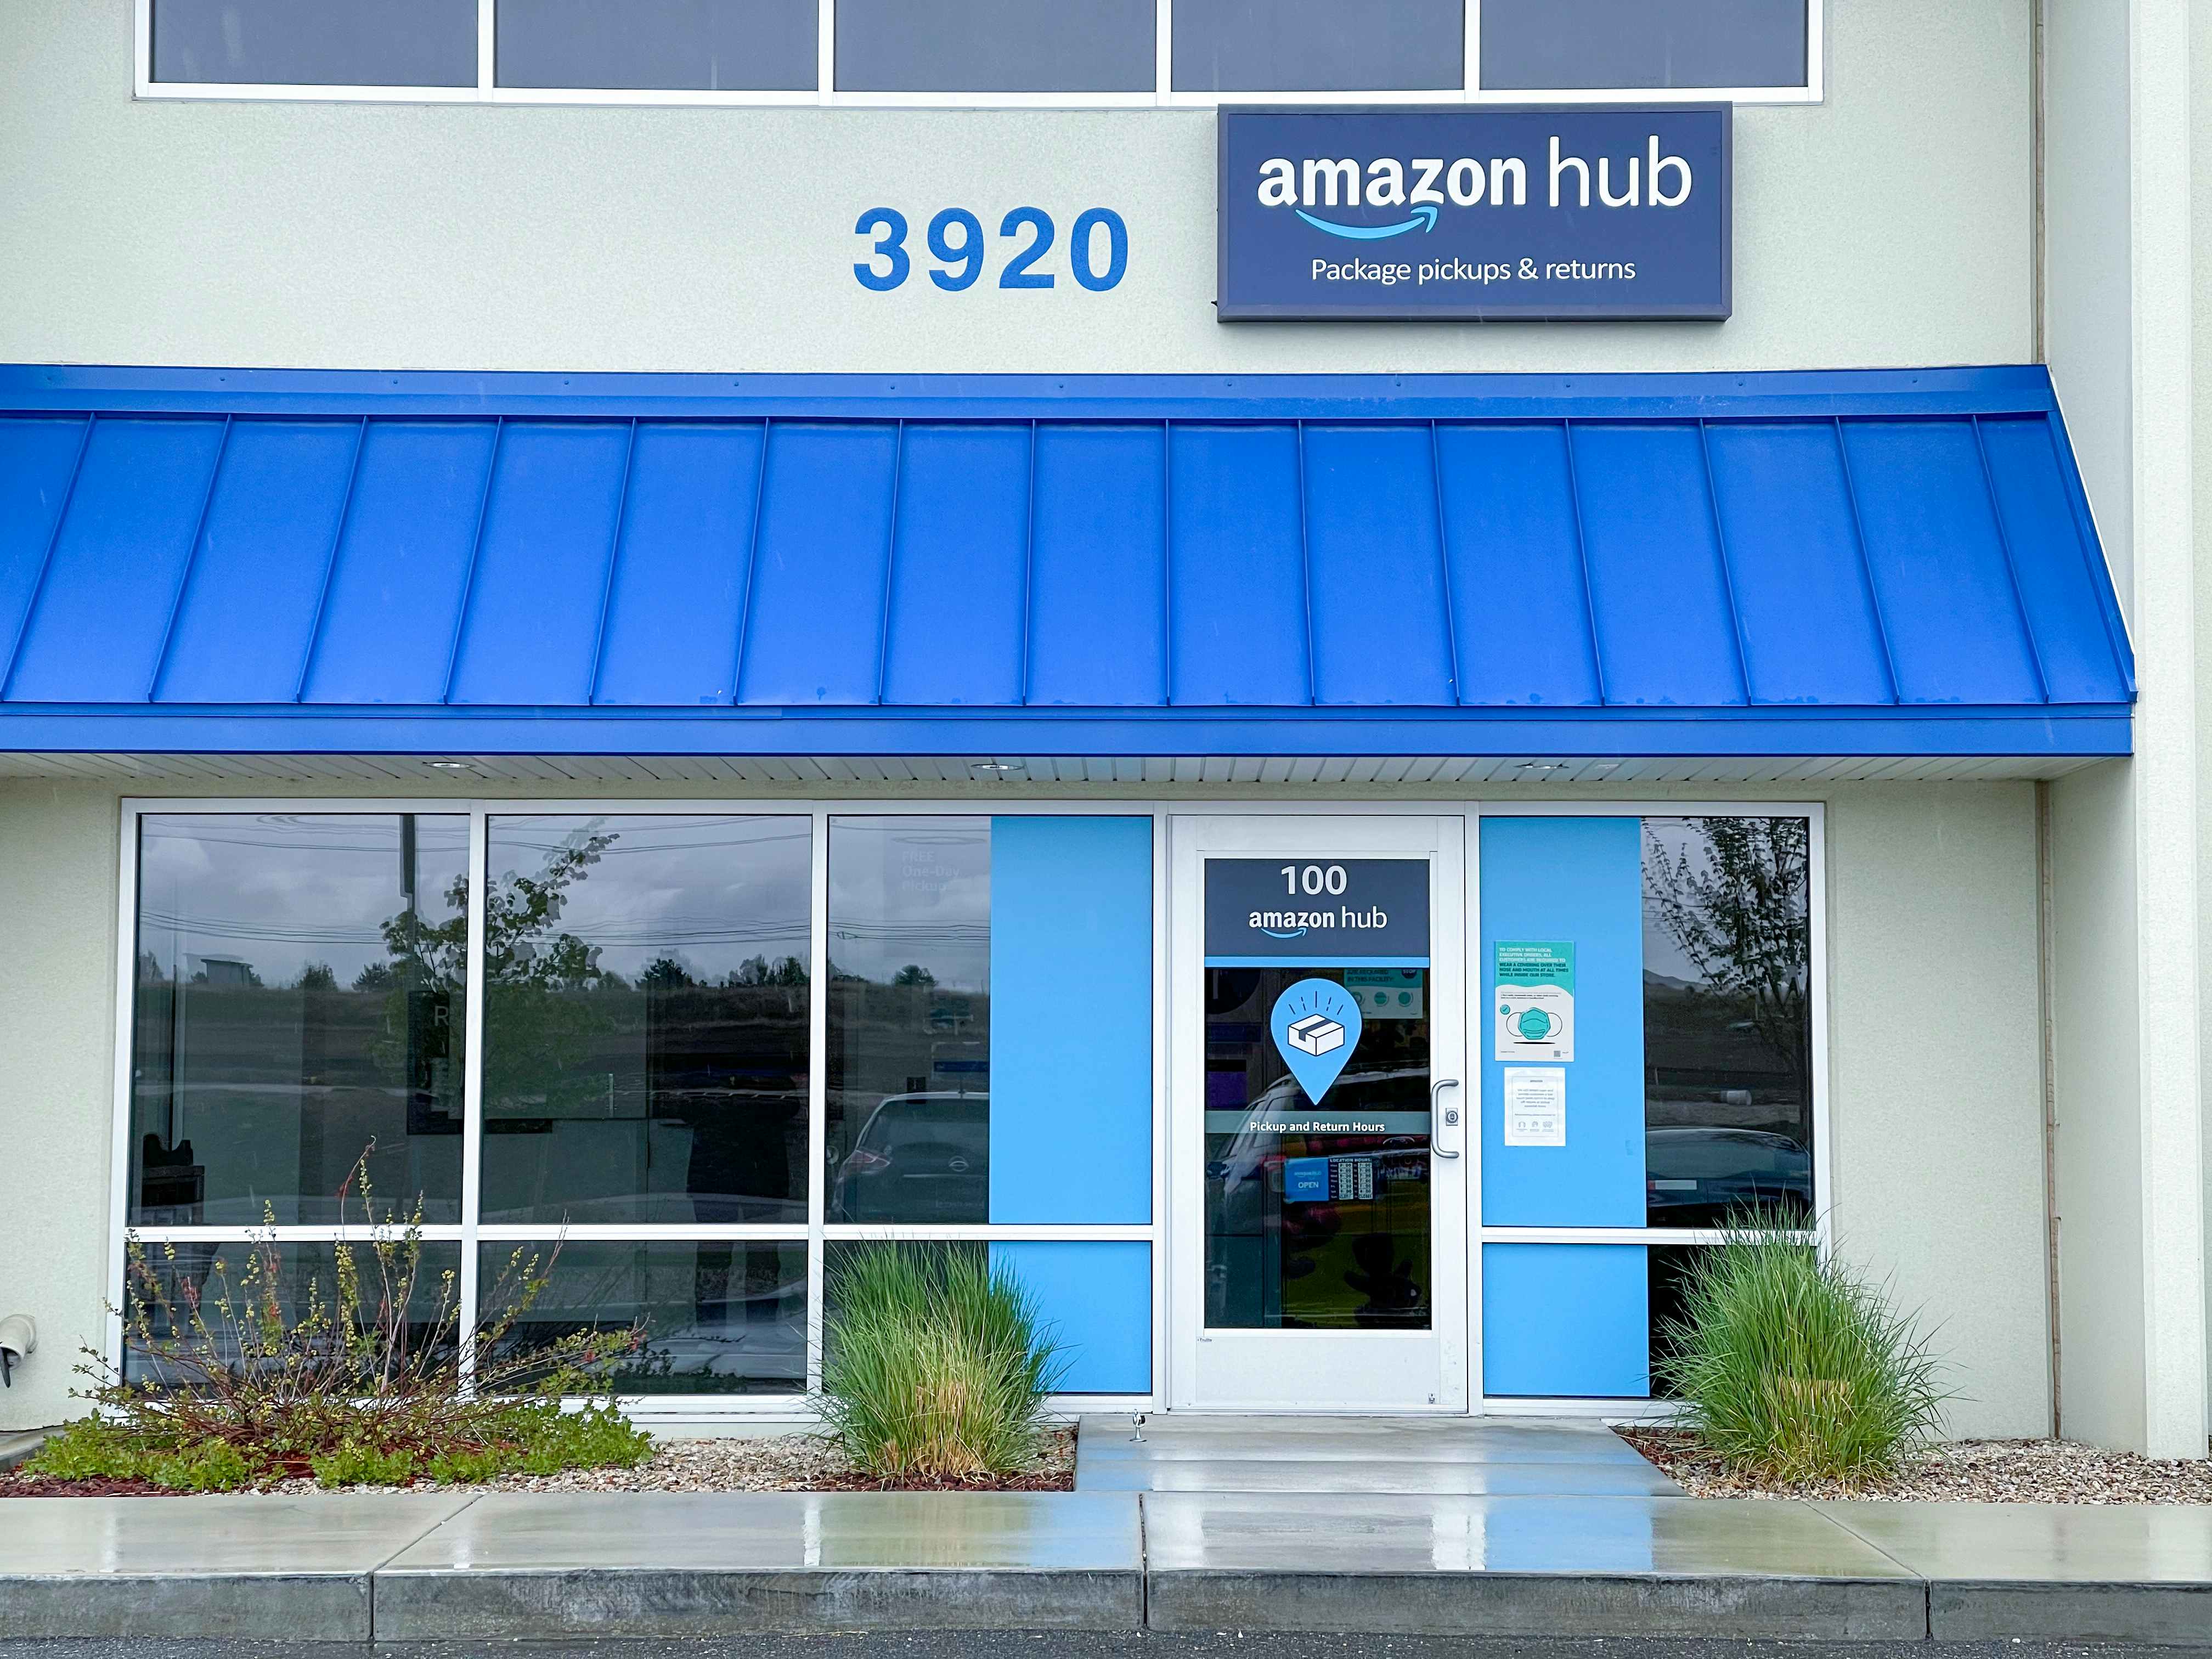 The outside of an amazon hub location